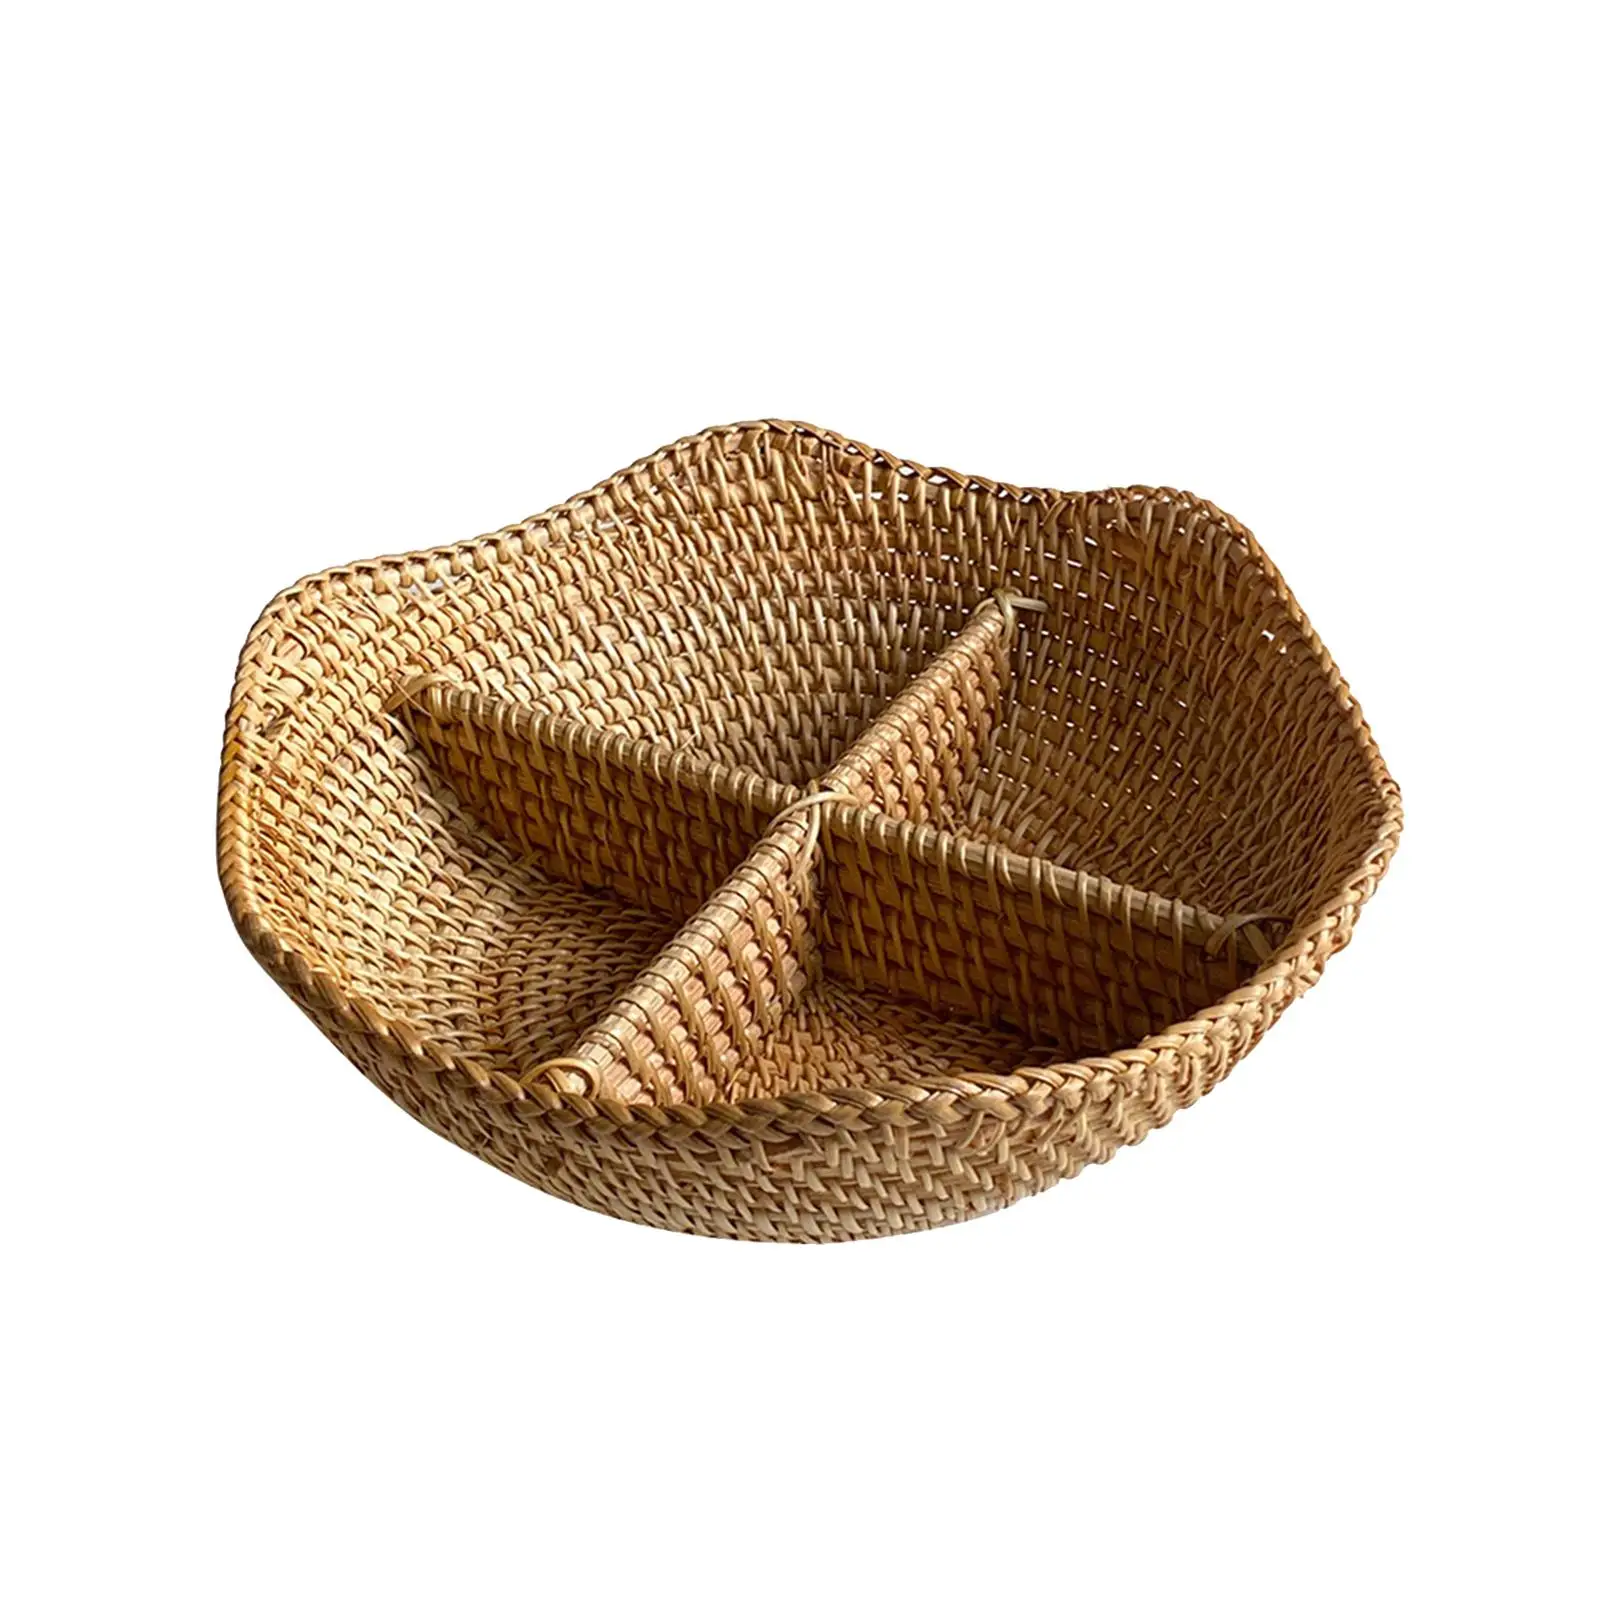 Rattan Storage Basket Divisional Stackable Portable Serving Tray Woven Bread Basket for Restaurant Home Breakfast Centerpiece